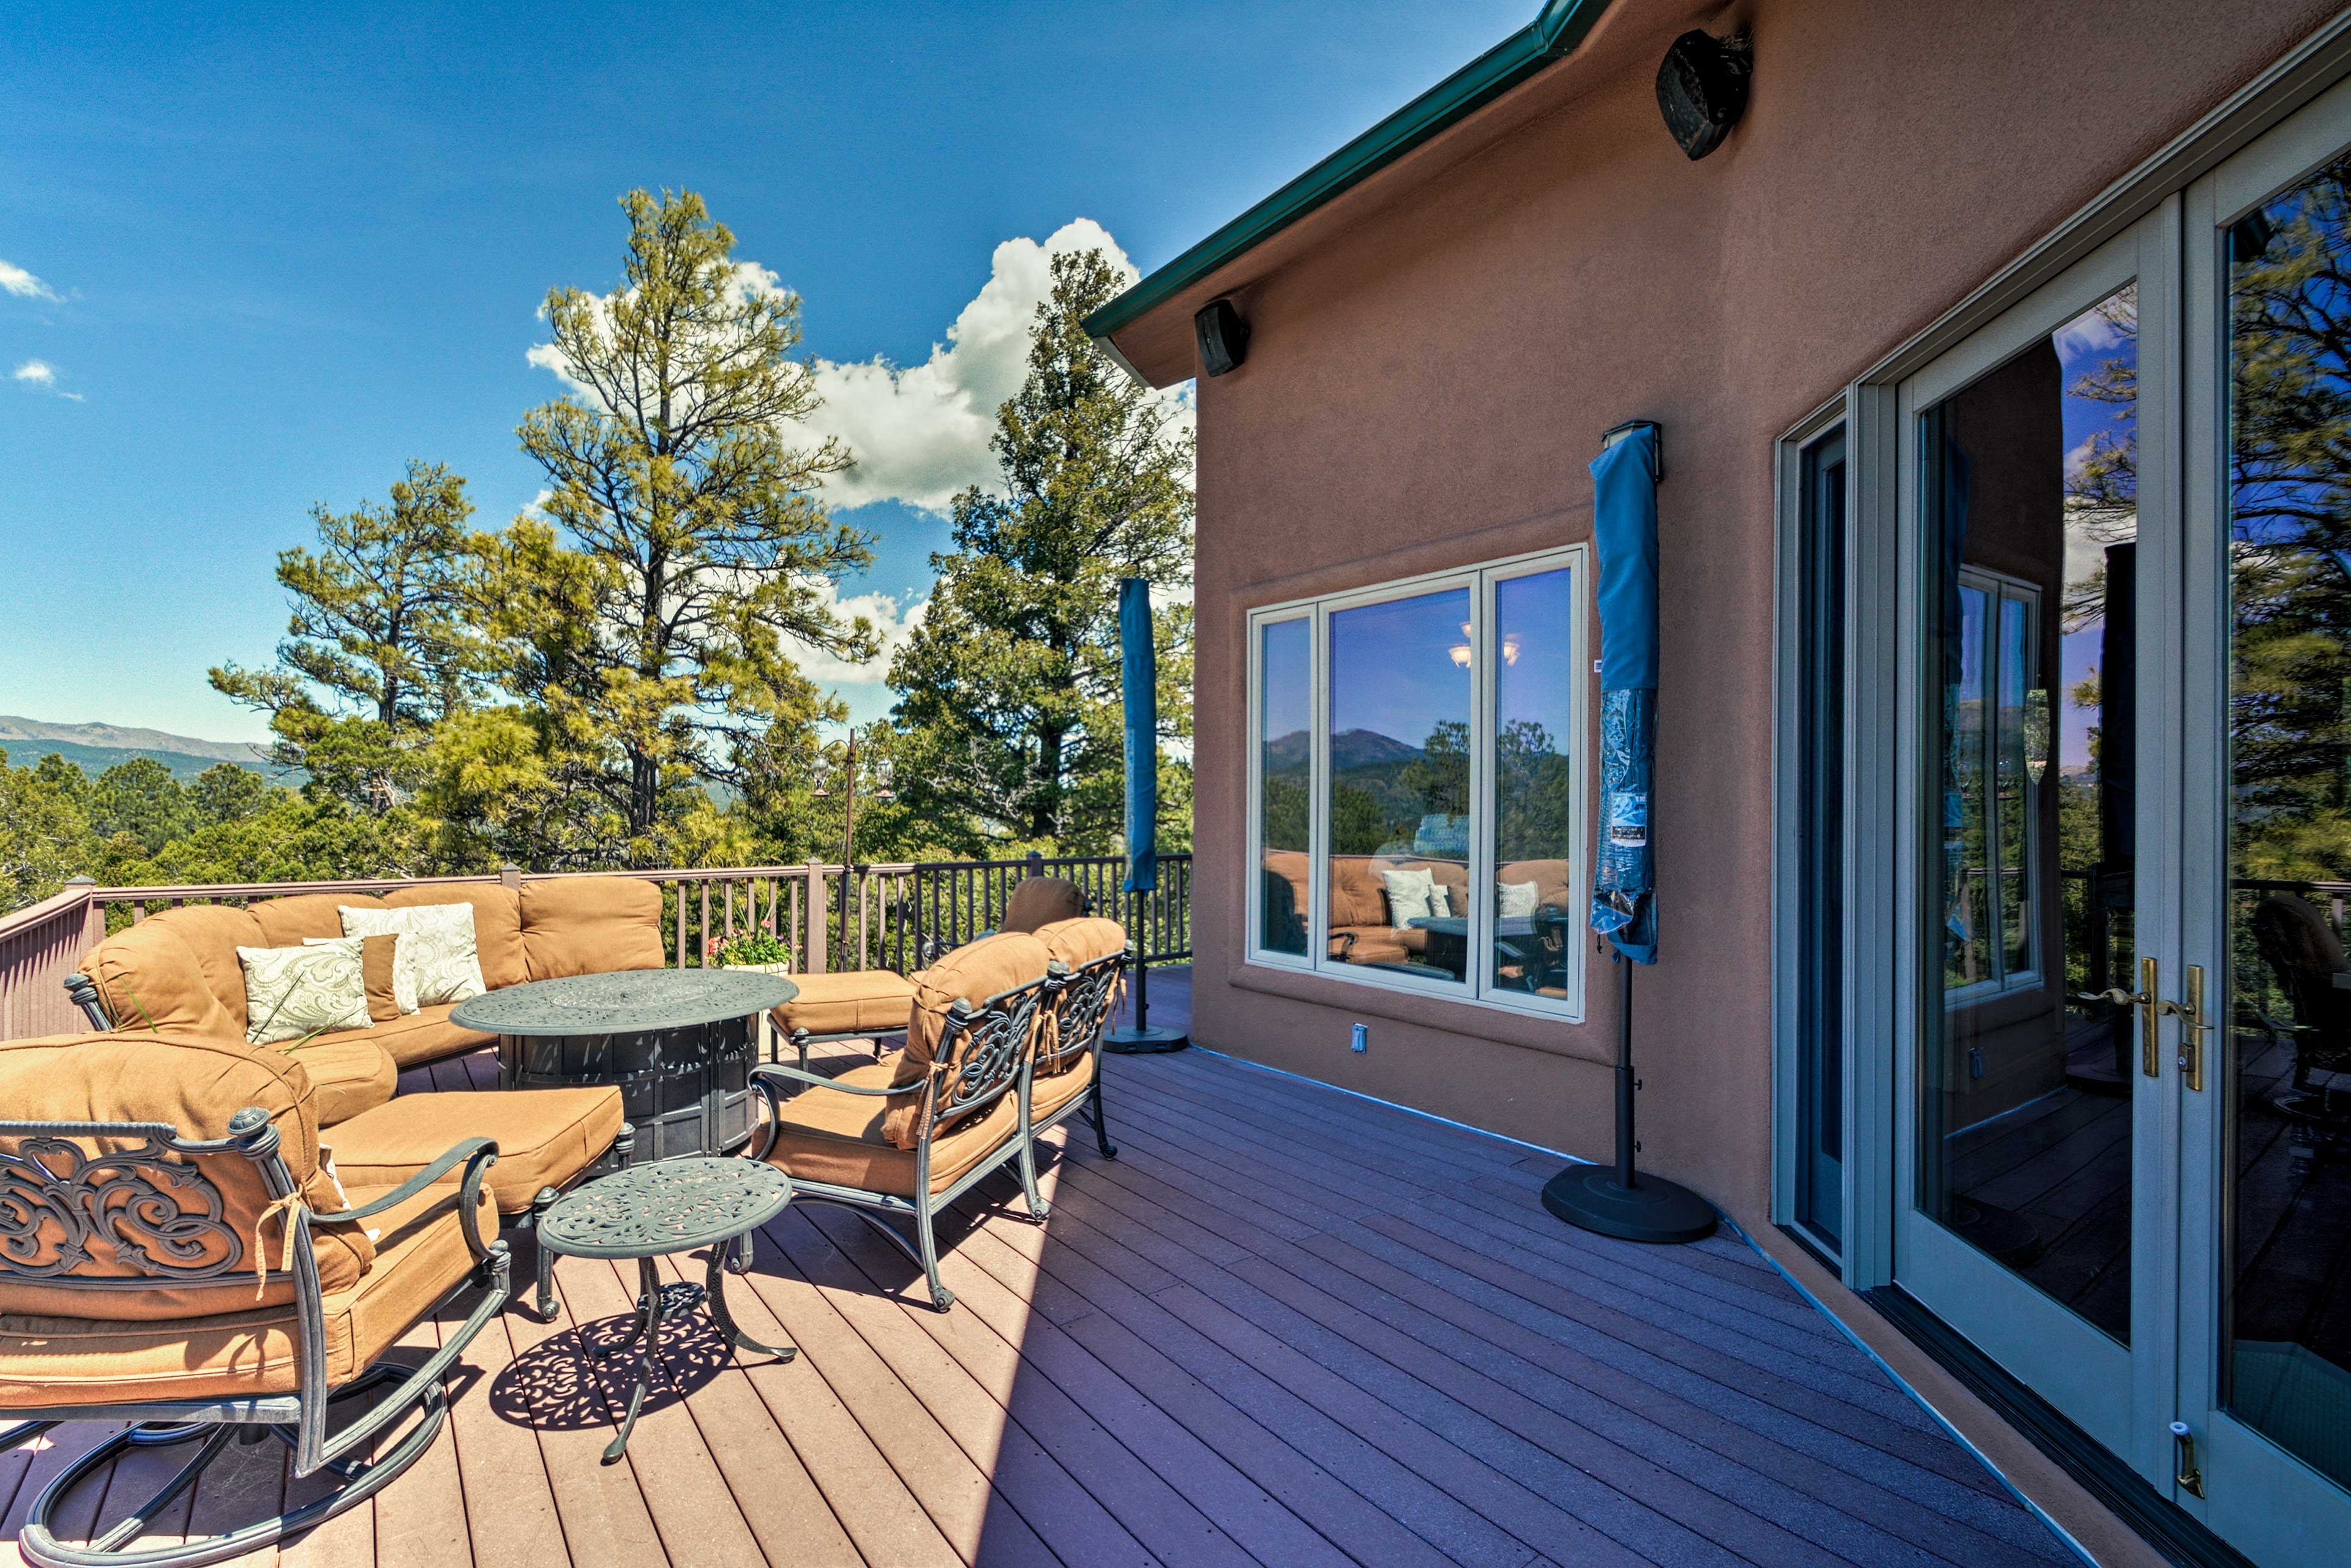 The mountain-view deck is the perfect place for your group to gather.